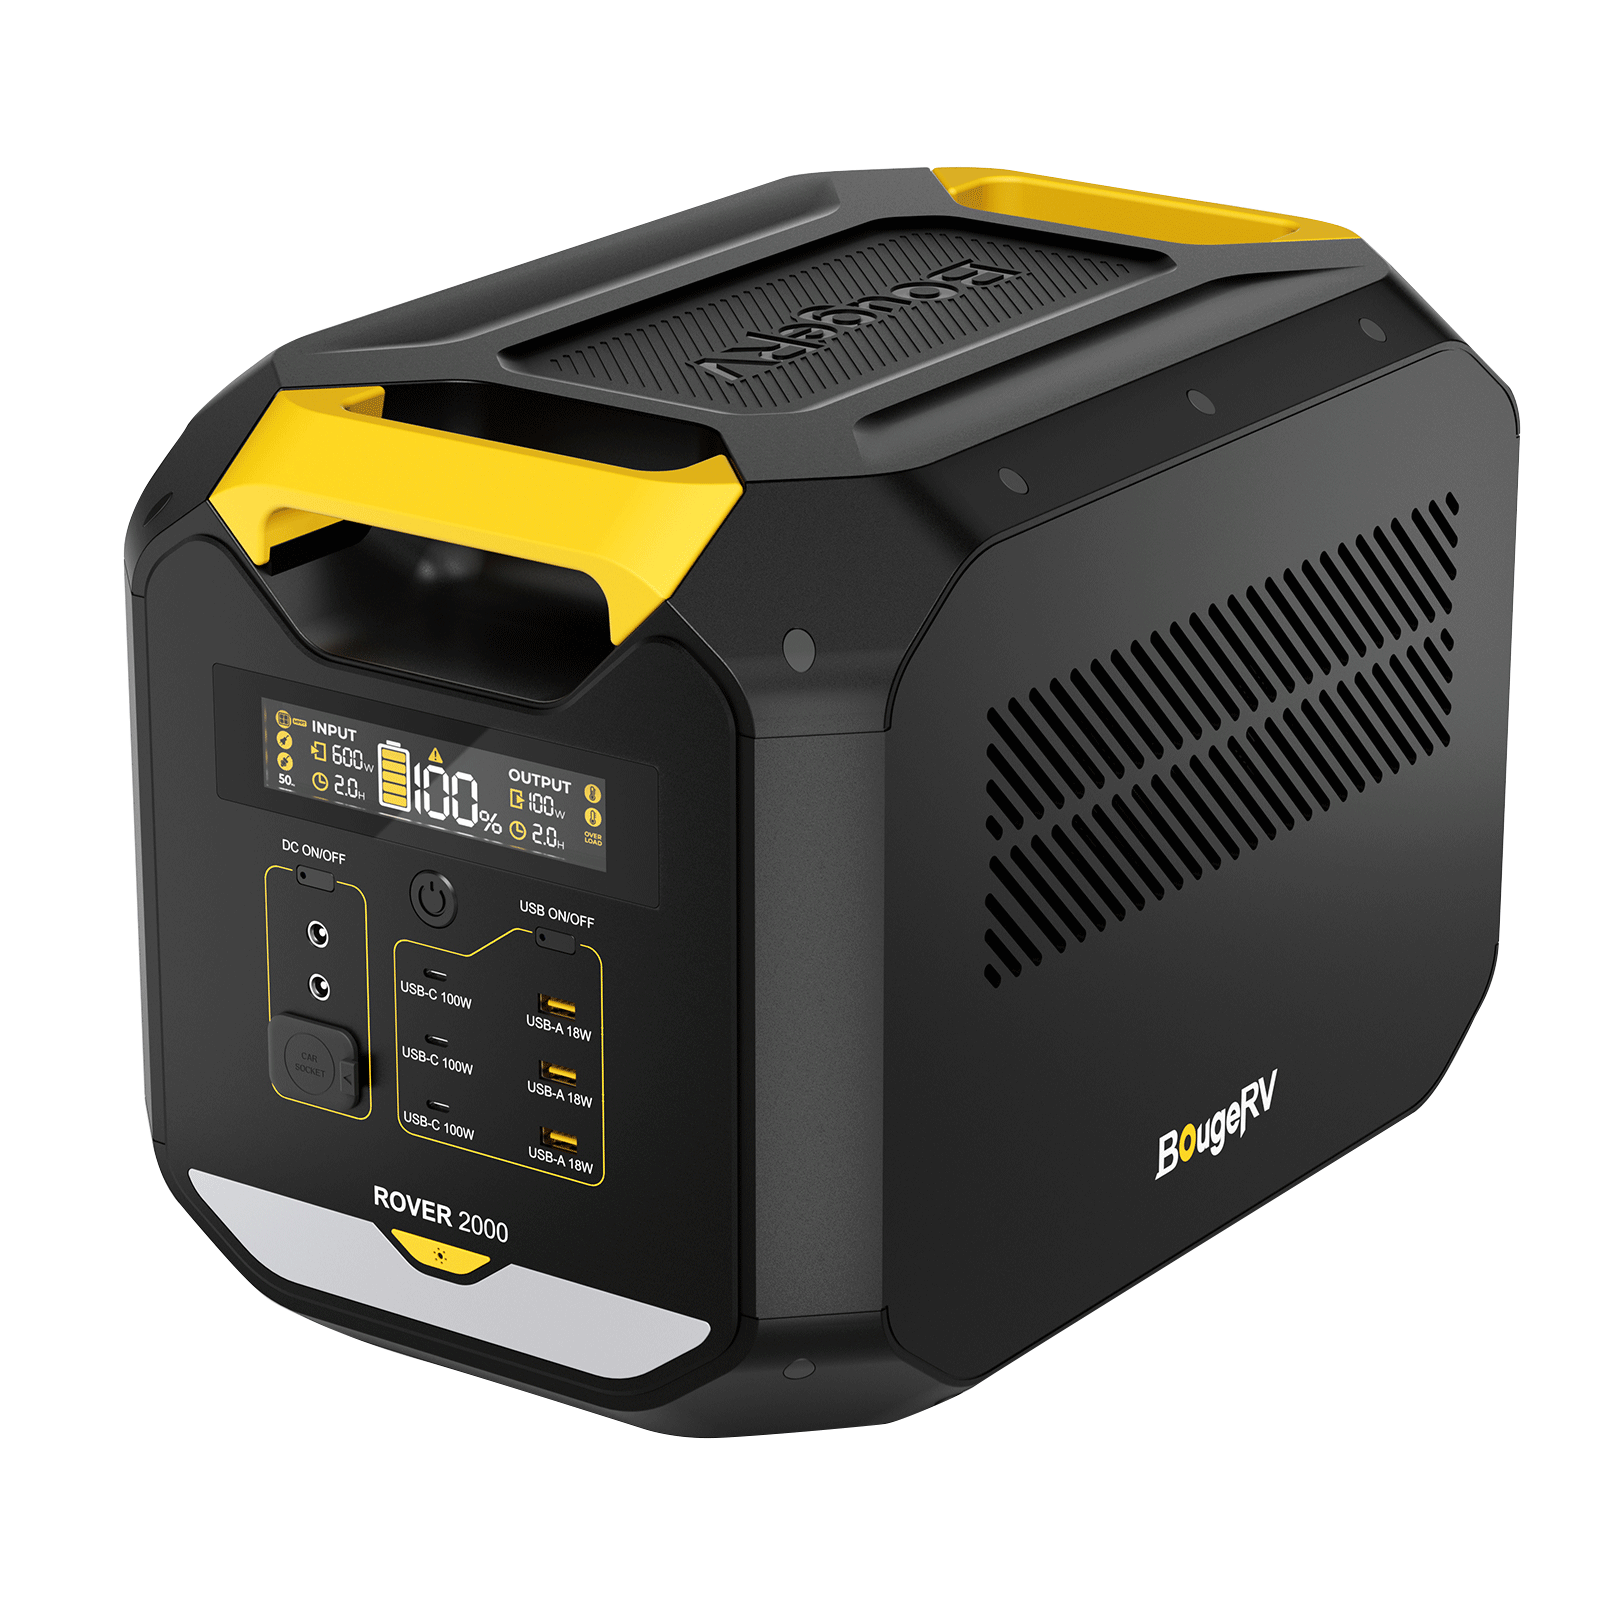 ROVER2000 Semi-Solid State Portable Power Station